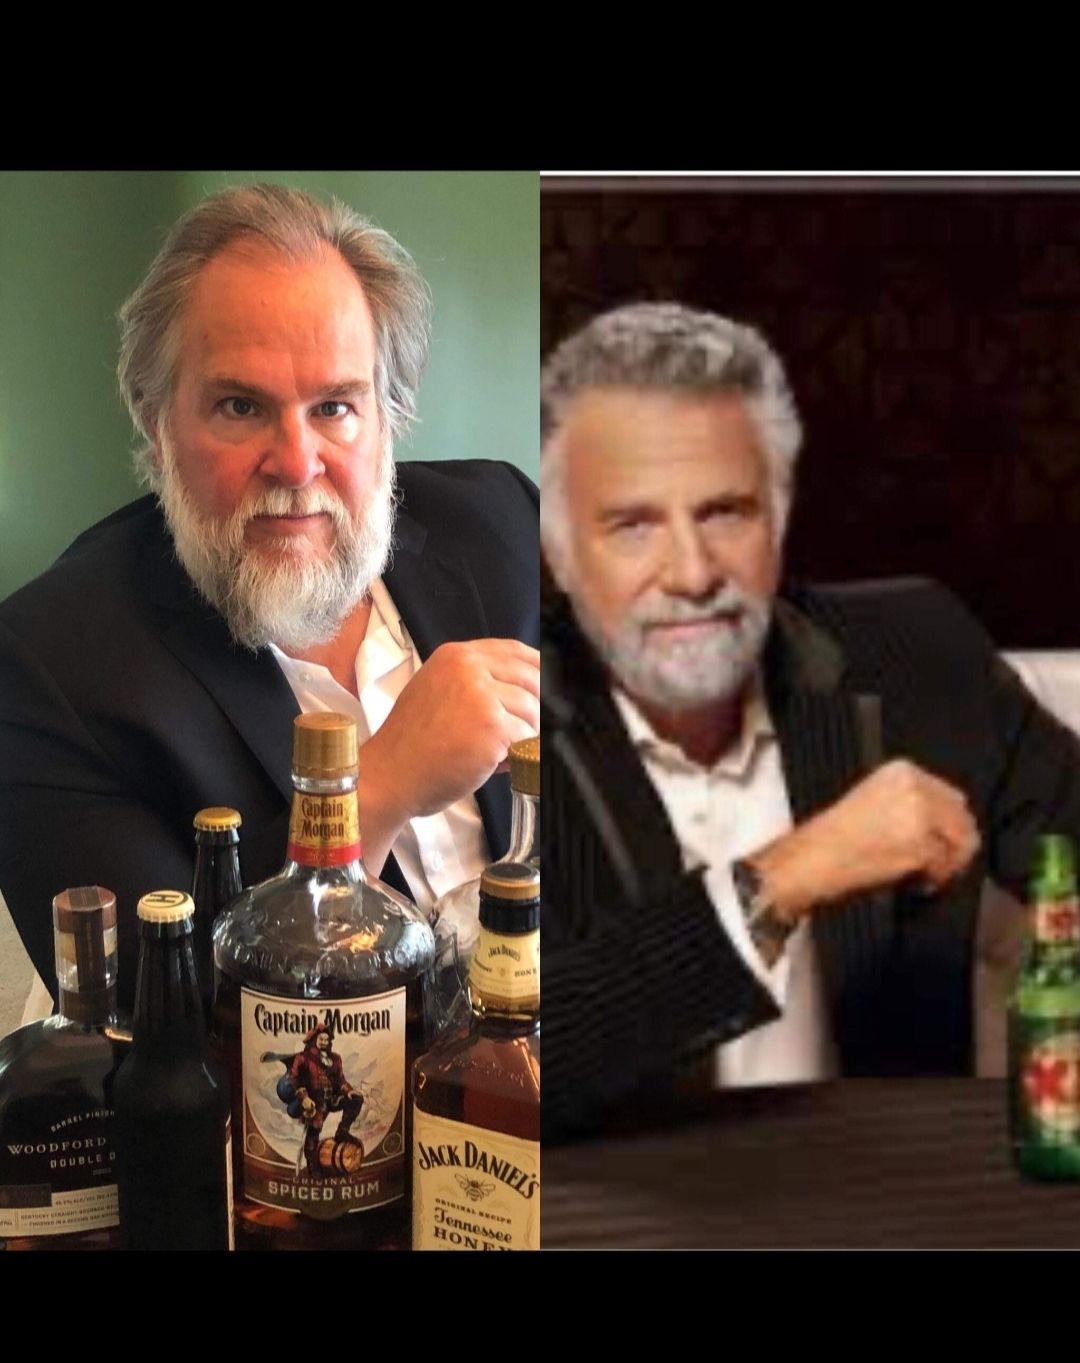 So my dad has been a little bored around the house lately, so he has started doing lookalike pics.